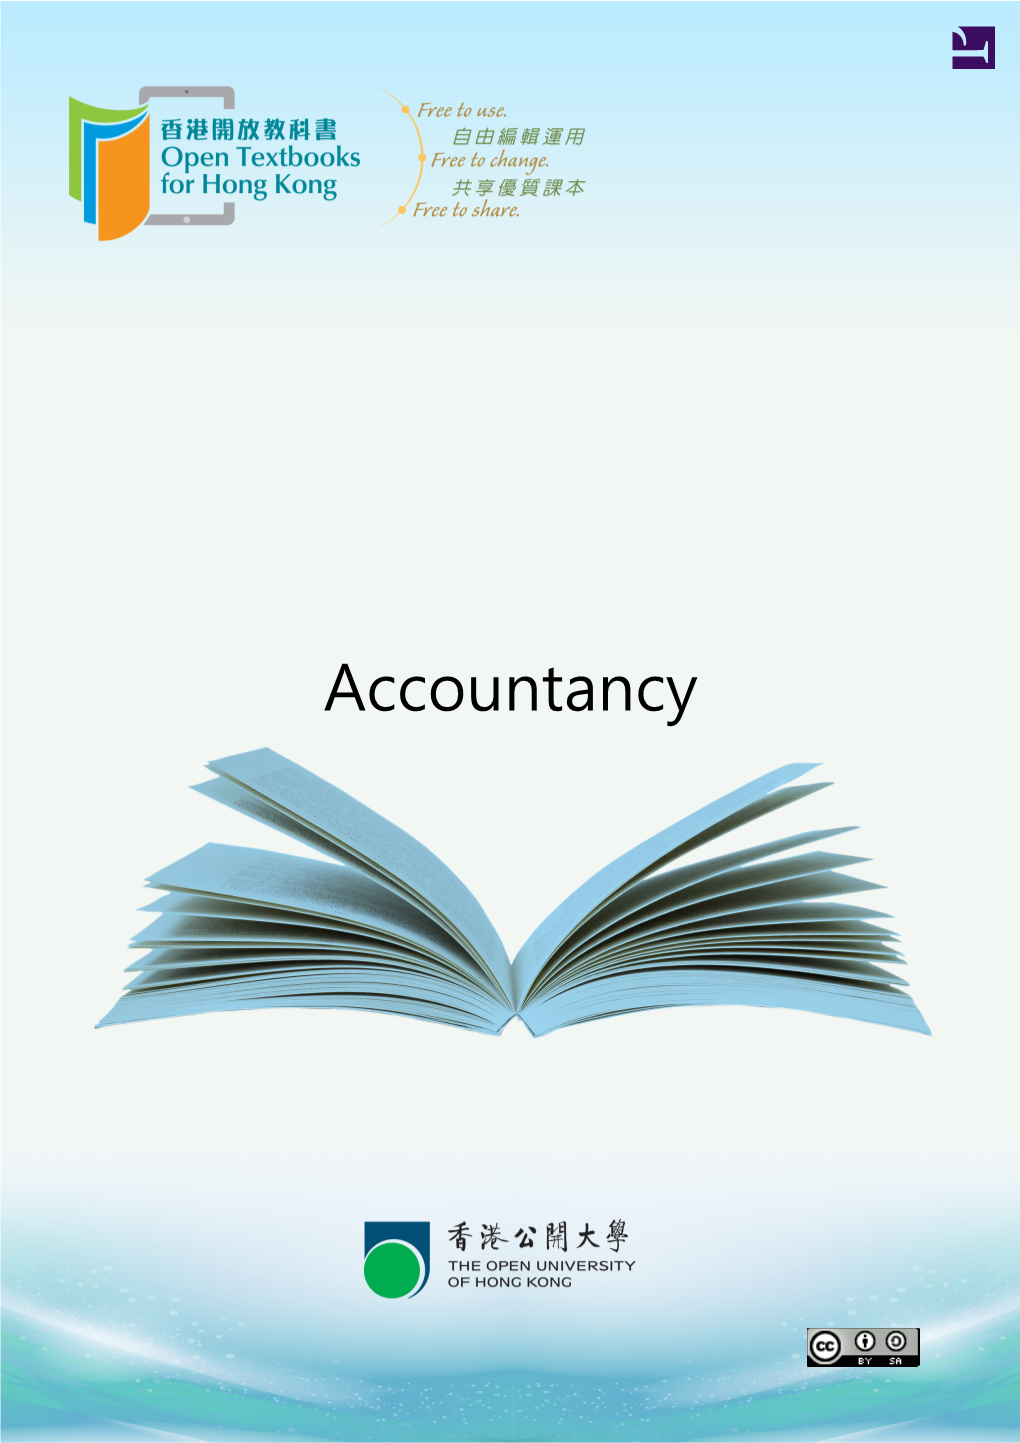 Accountancy This Work Is Licensed Under a Creative Commons-Sharealike 4.0 International License